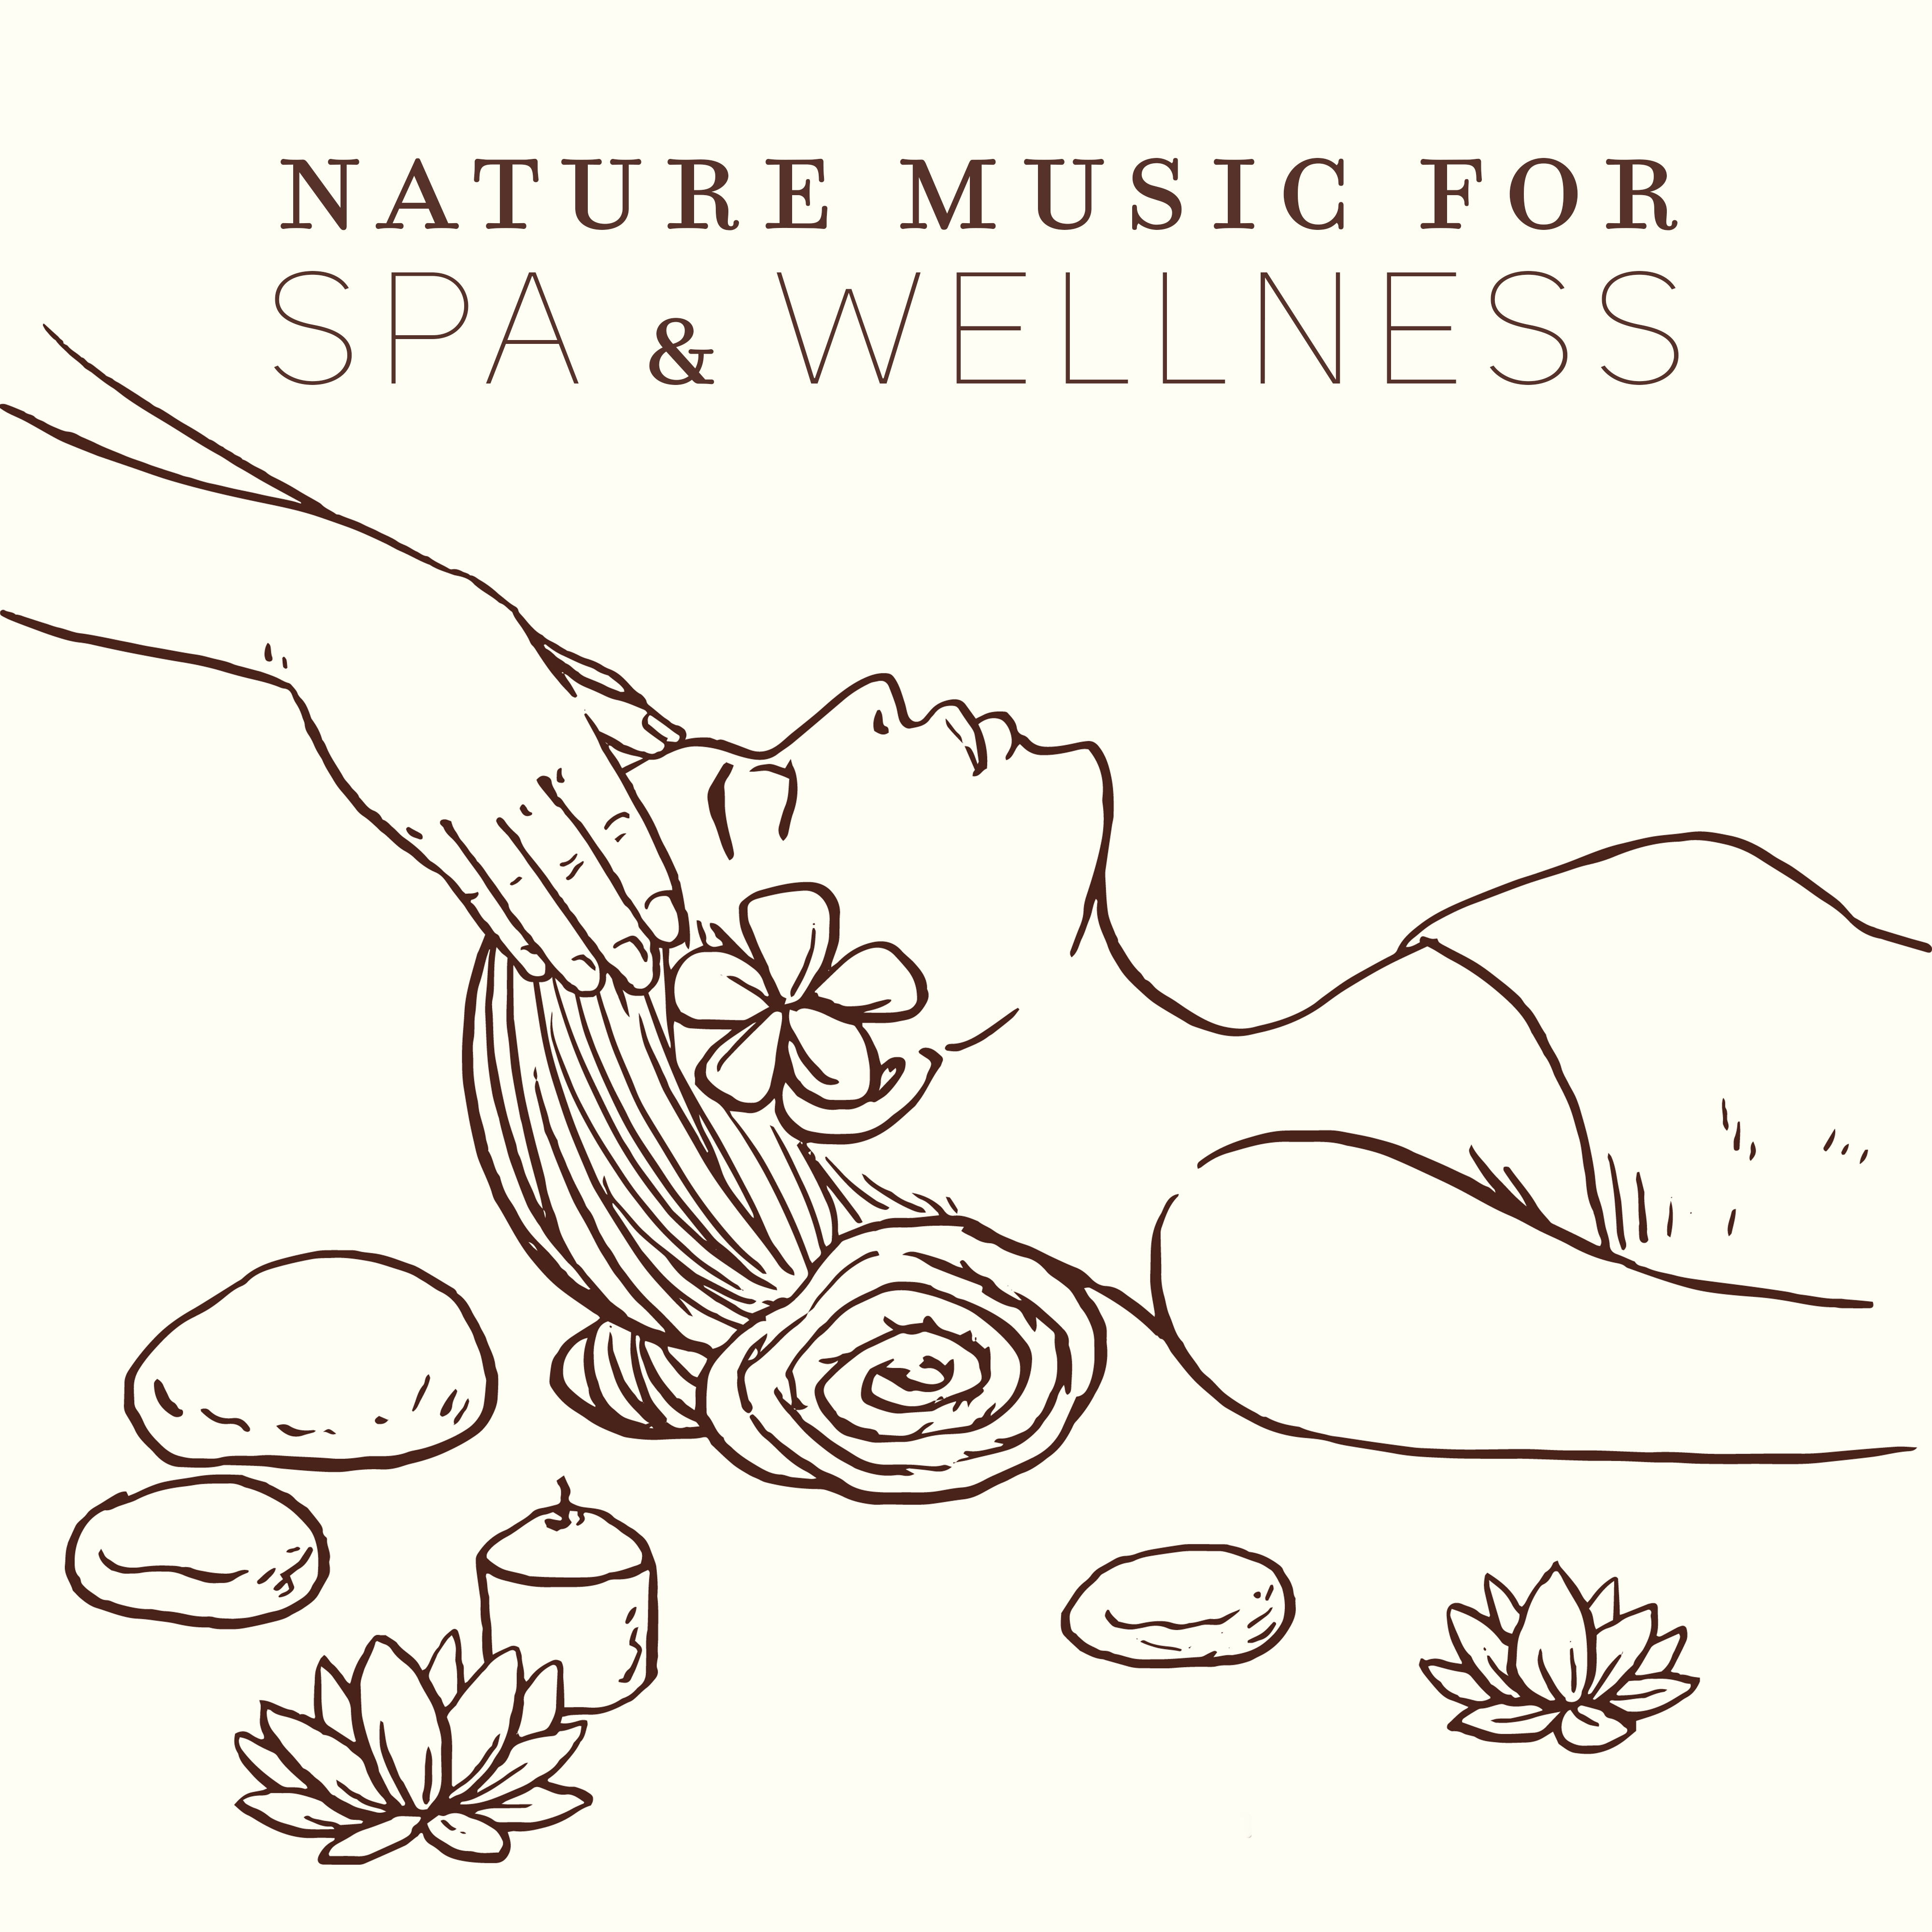 Nature Music for Spa & Wellness